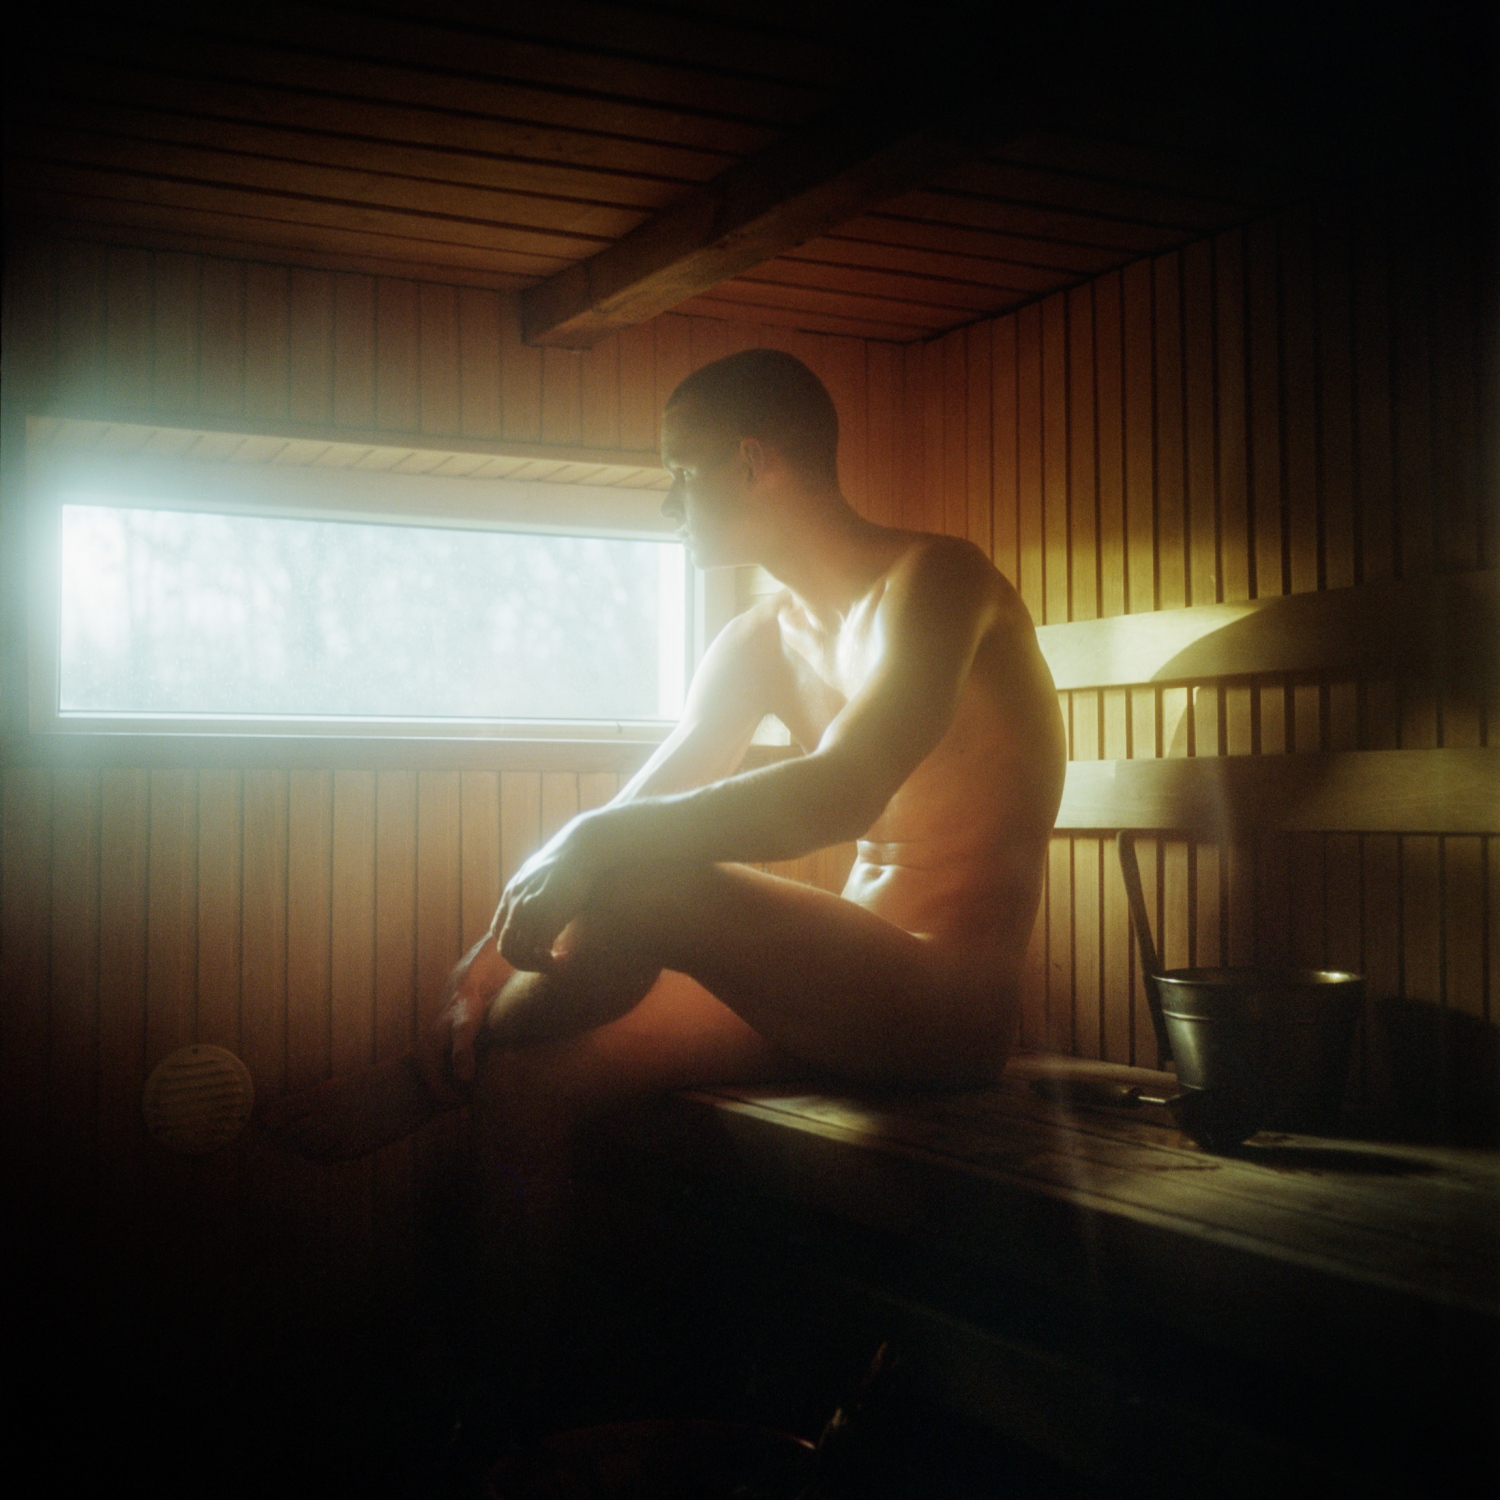 Martin rests in his sauna after helping his family to clean up the house before the long traditional Christmas celebrations.